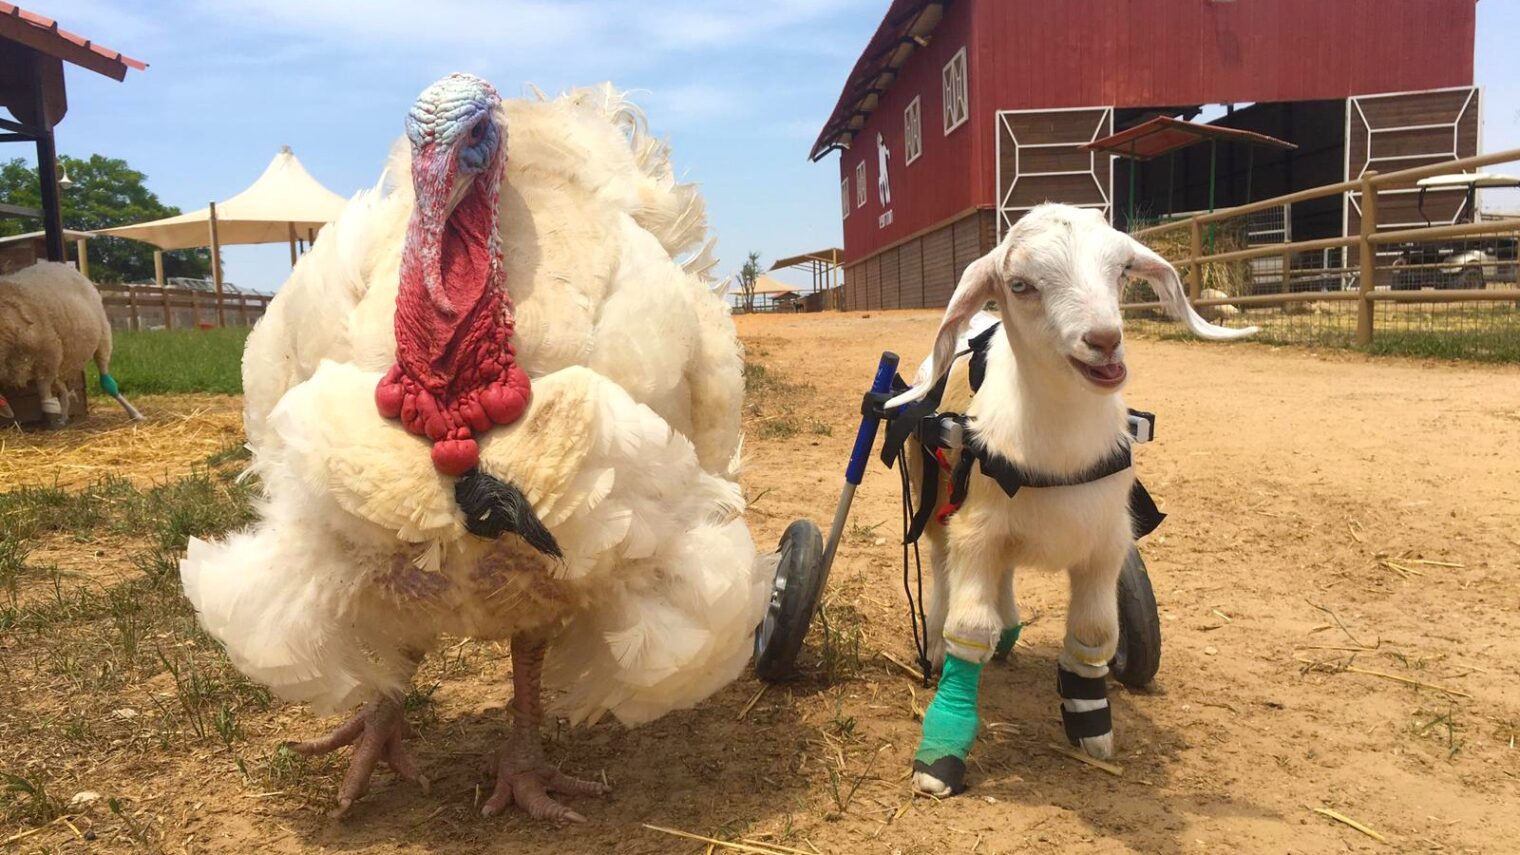 Yael the turkey, rescued from the meat industry, and Billy the goat, rescued from the milk industry. Photo by Noa Aviv/Freedom Farm Sanctuary